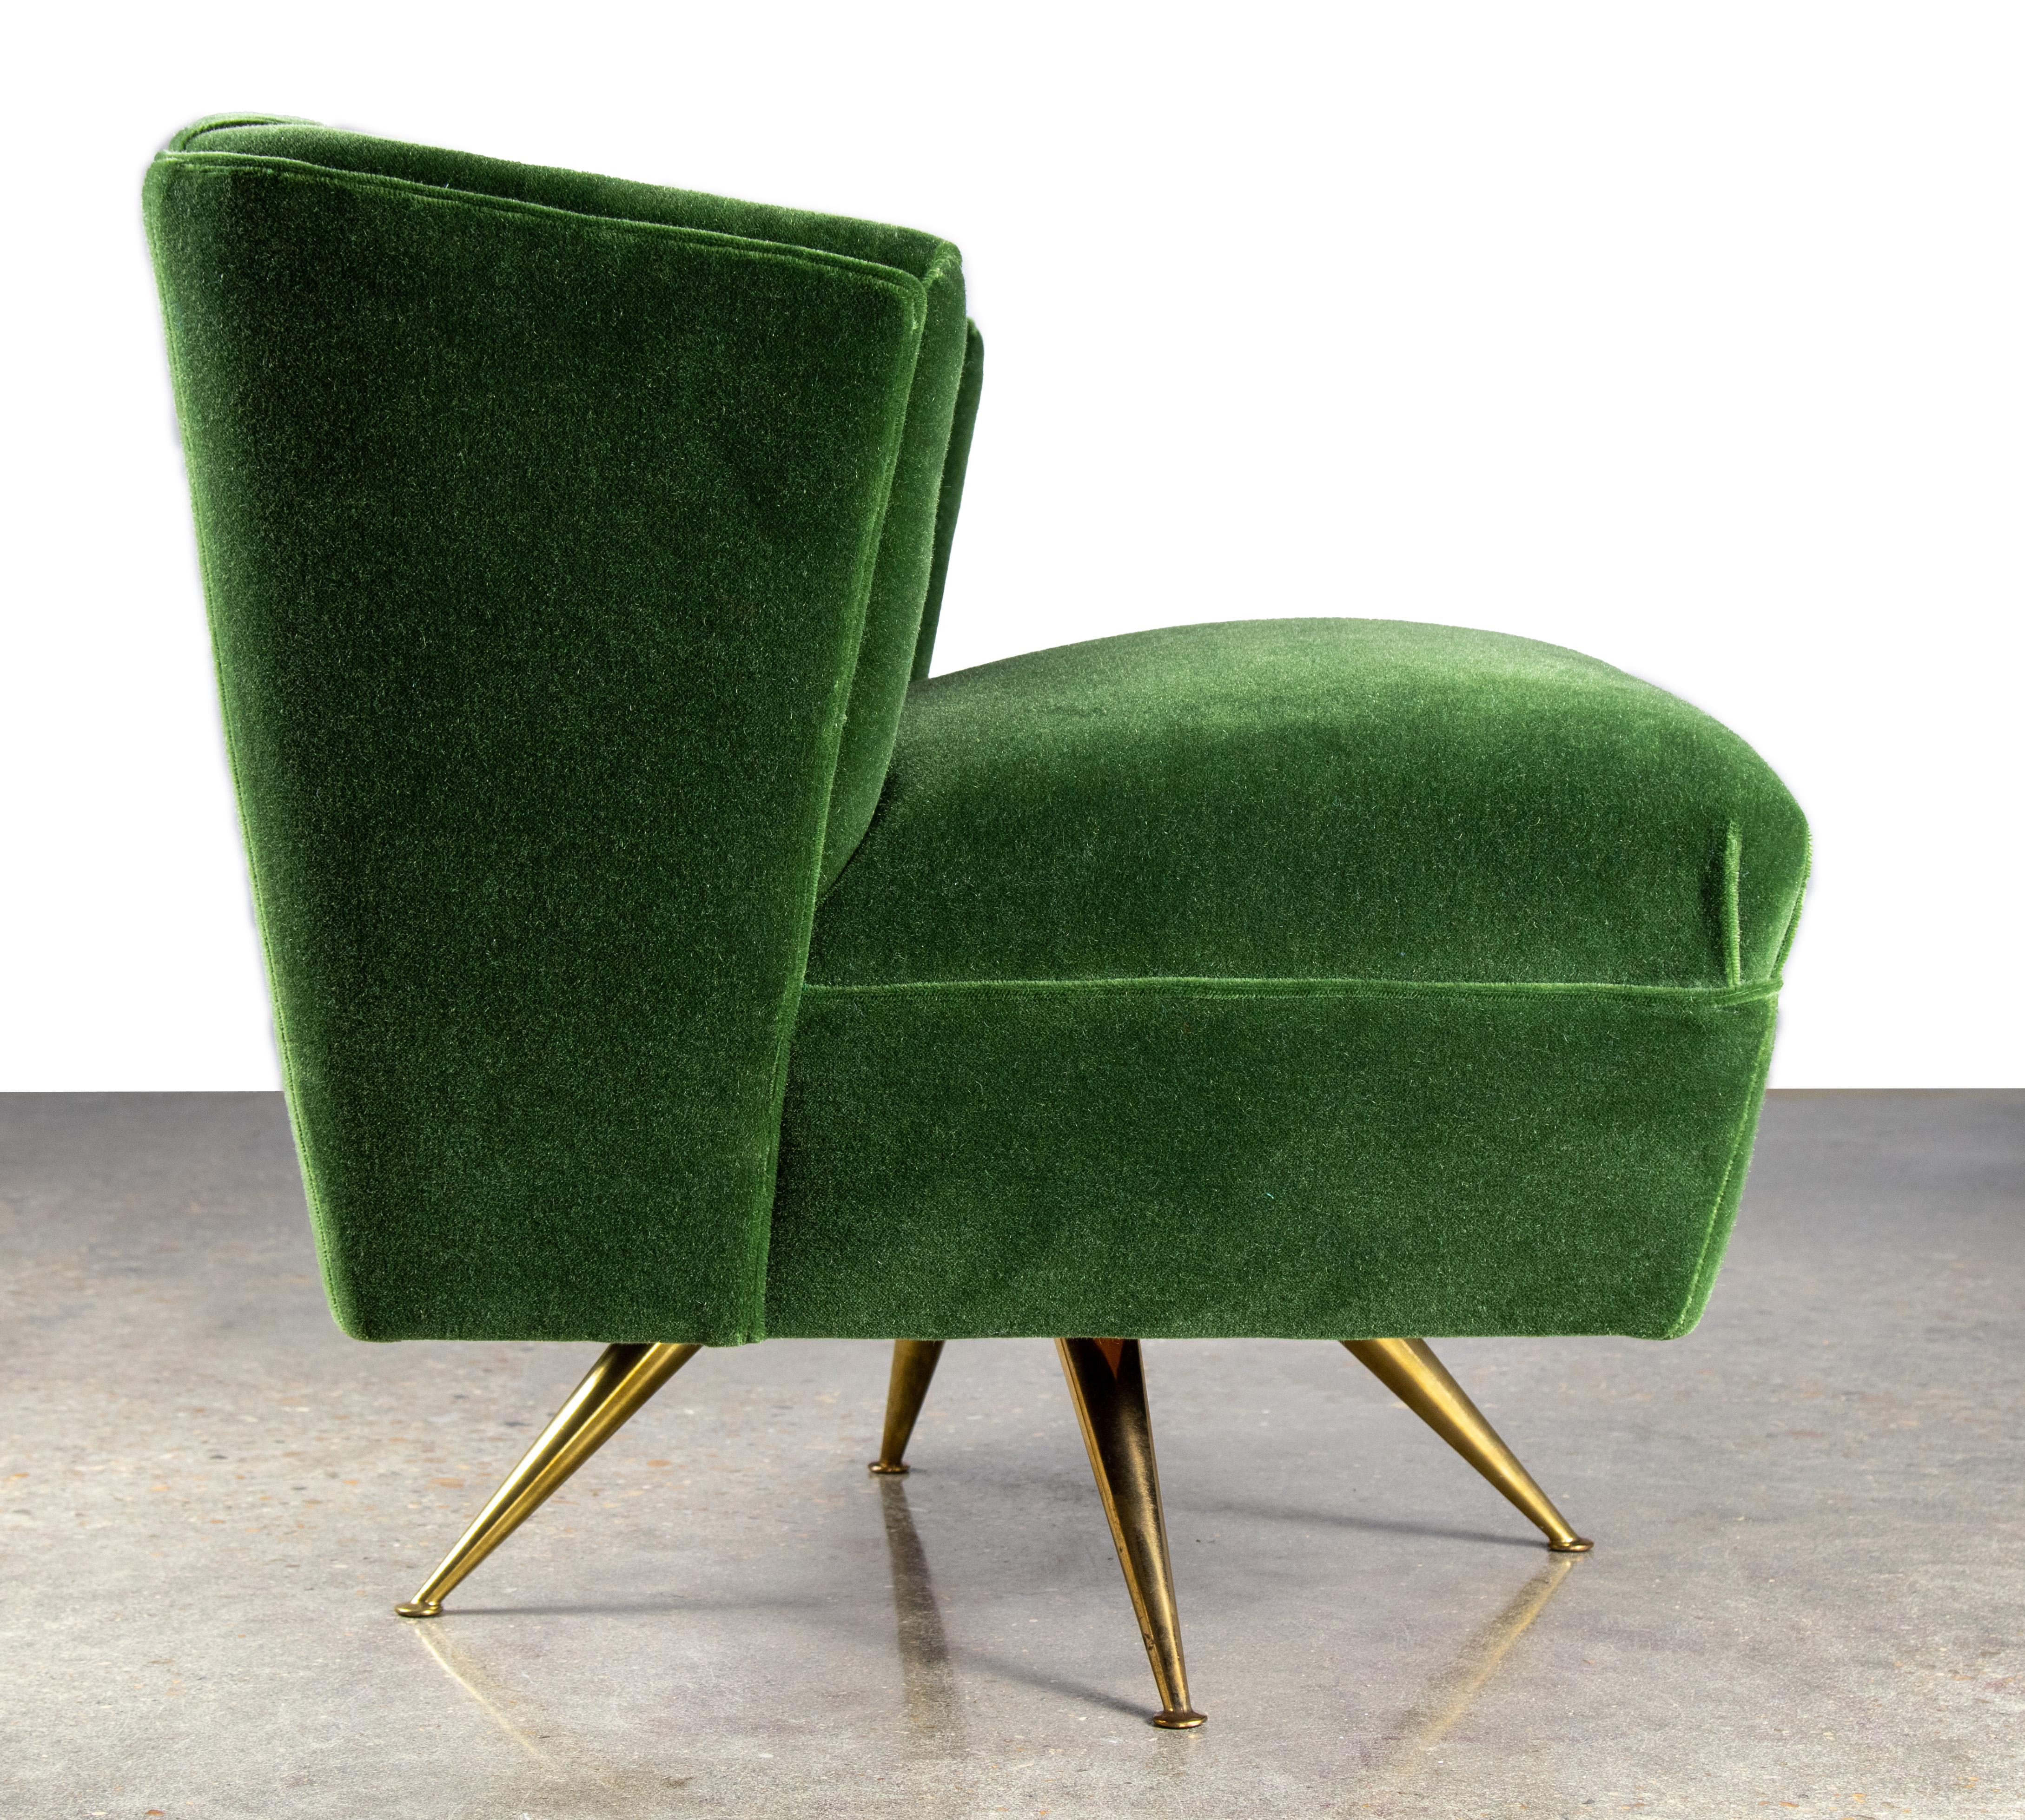 Mid-20th Century 1950s Henry P Glass Swivel Lounge Chair Green Mohair on brass legs JL Chase Co. For Sale